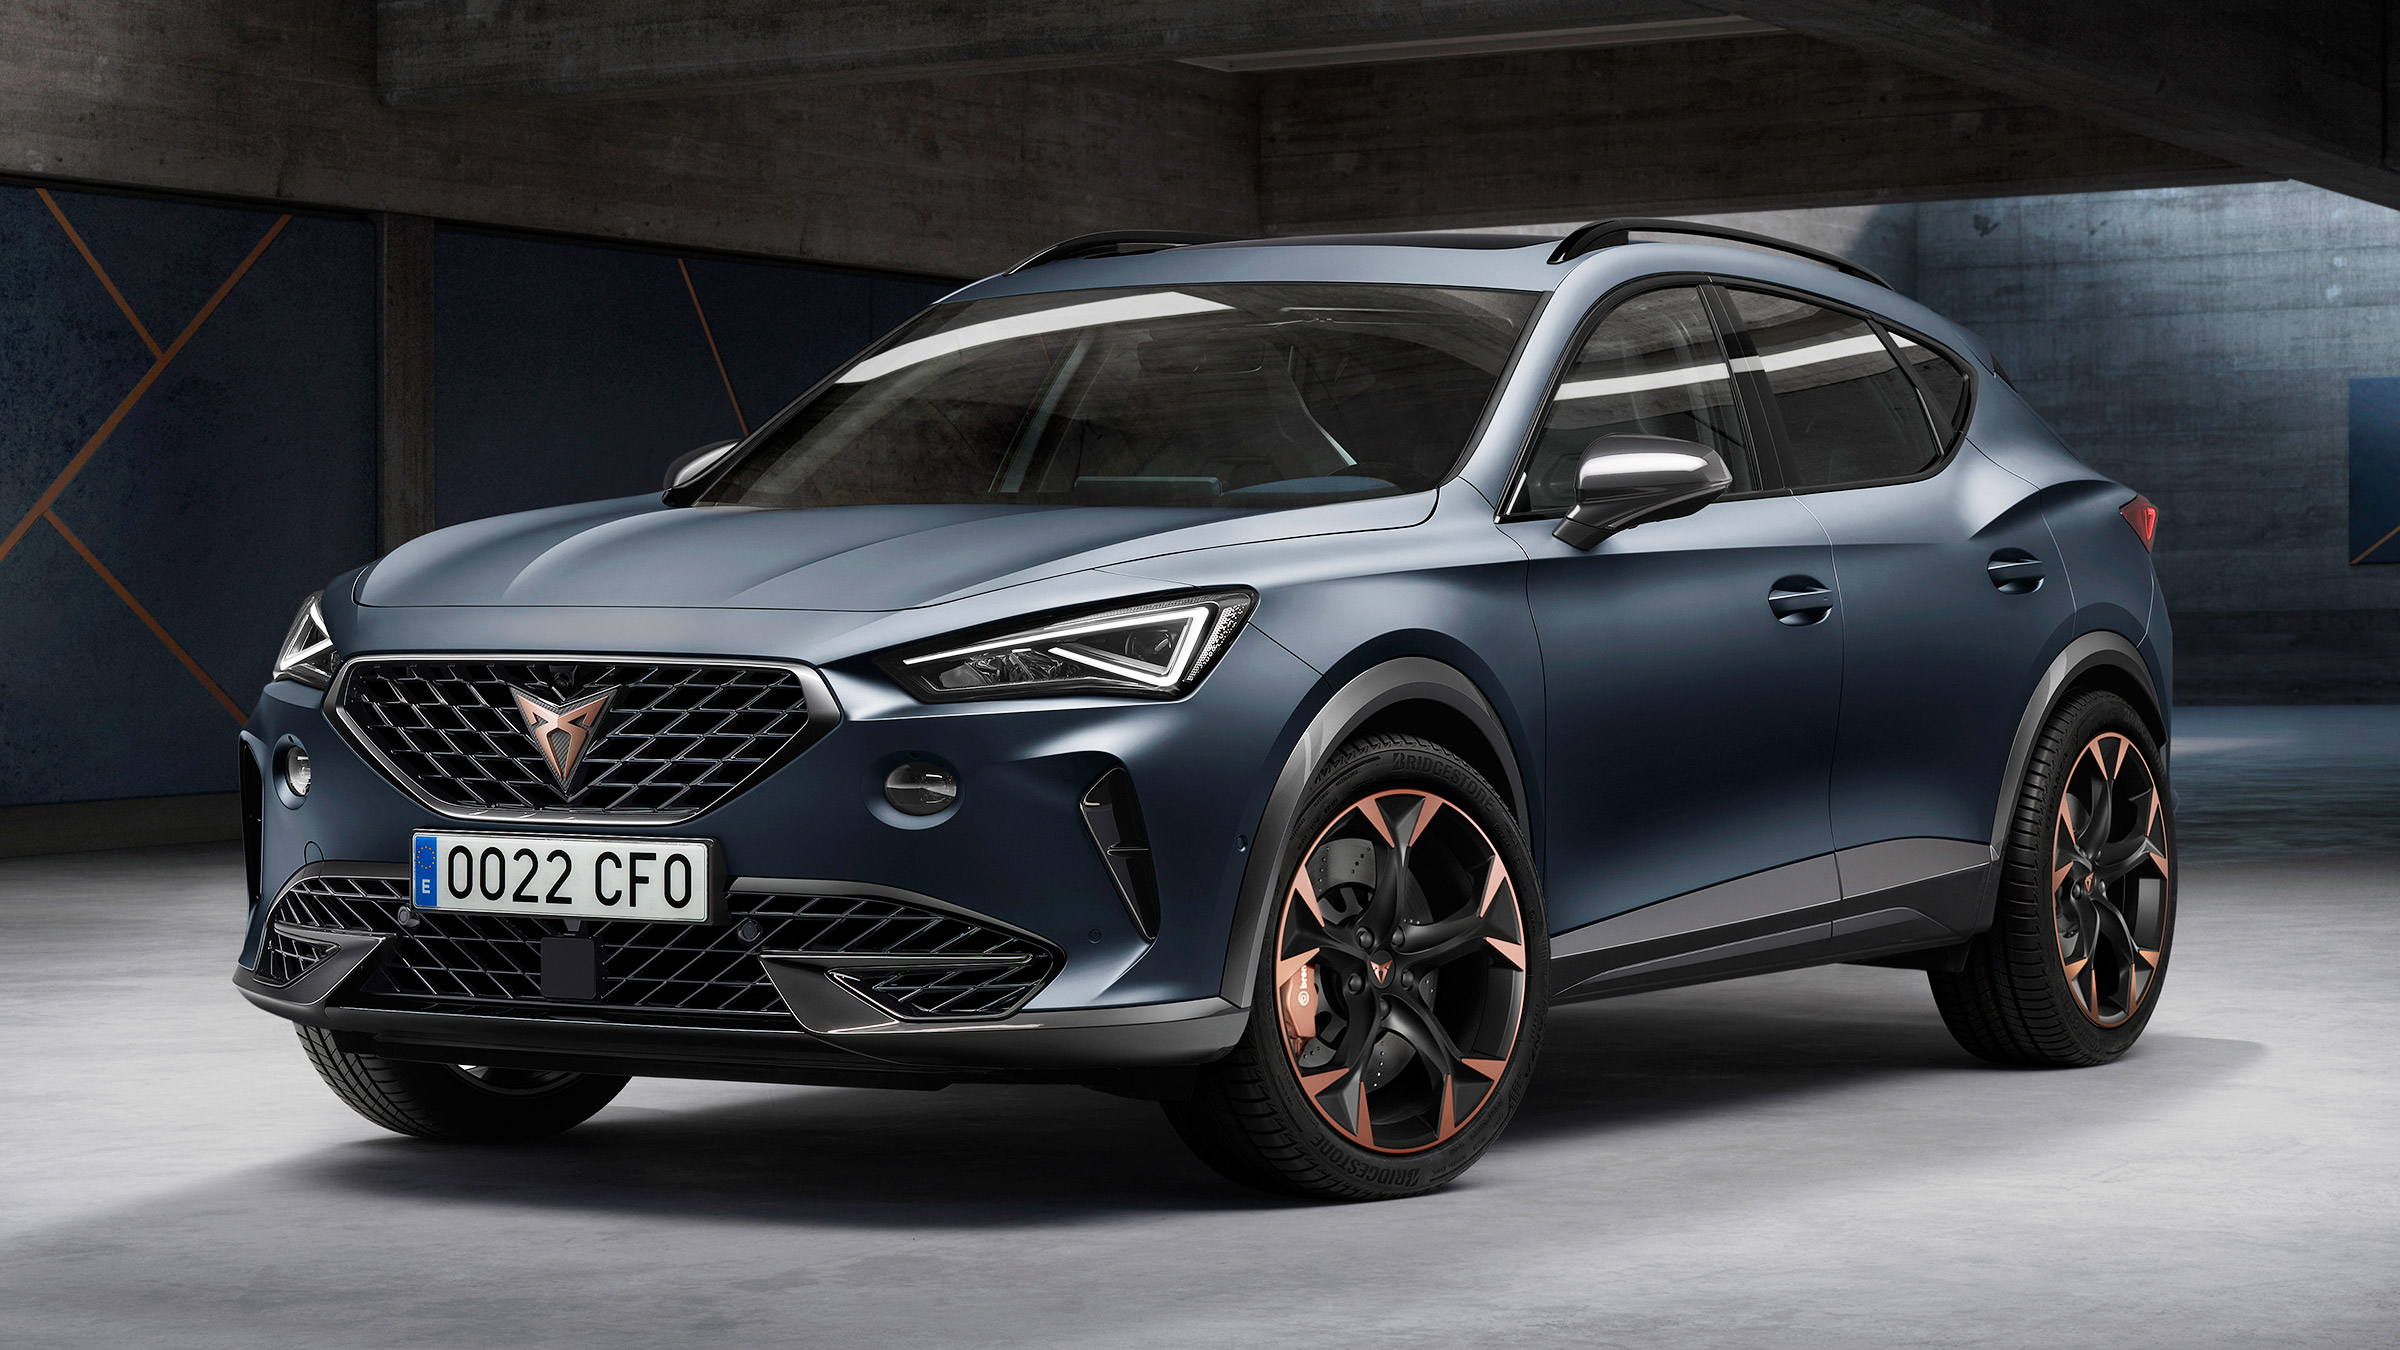 New 2020 Cupra Formentor: UK prices and specs revealed 